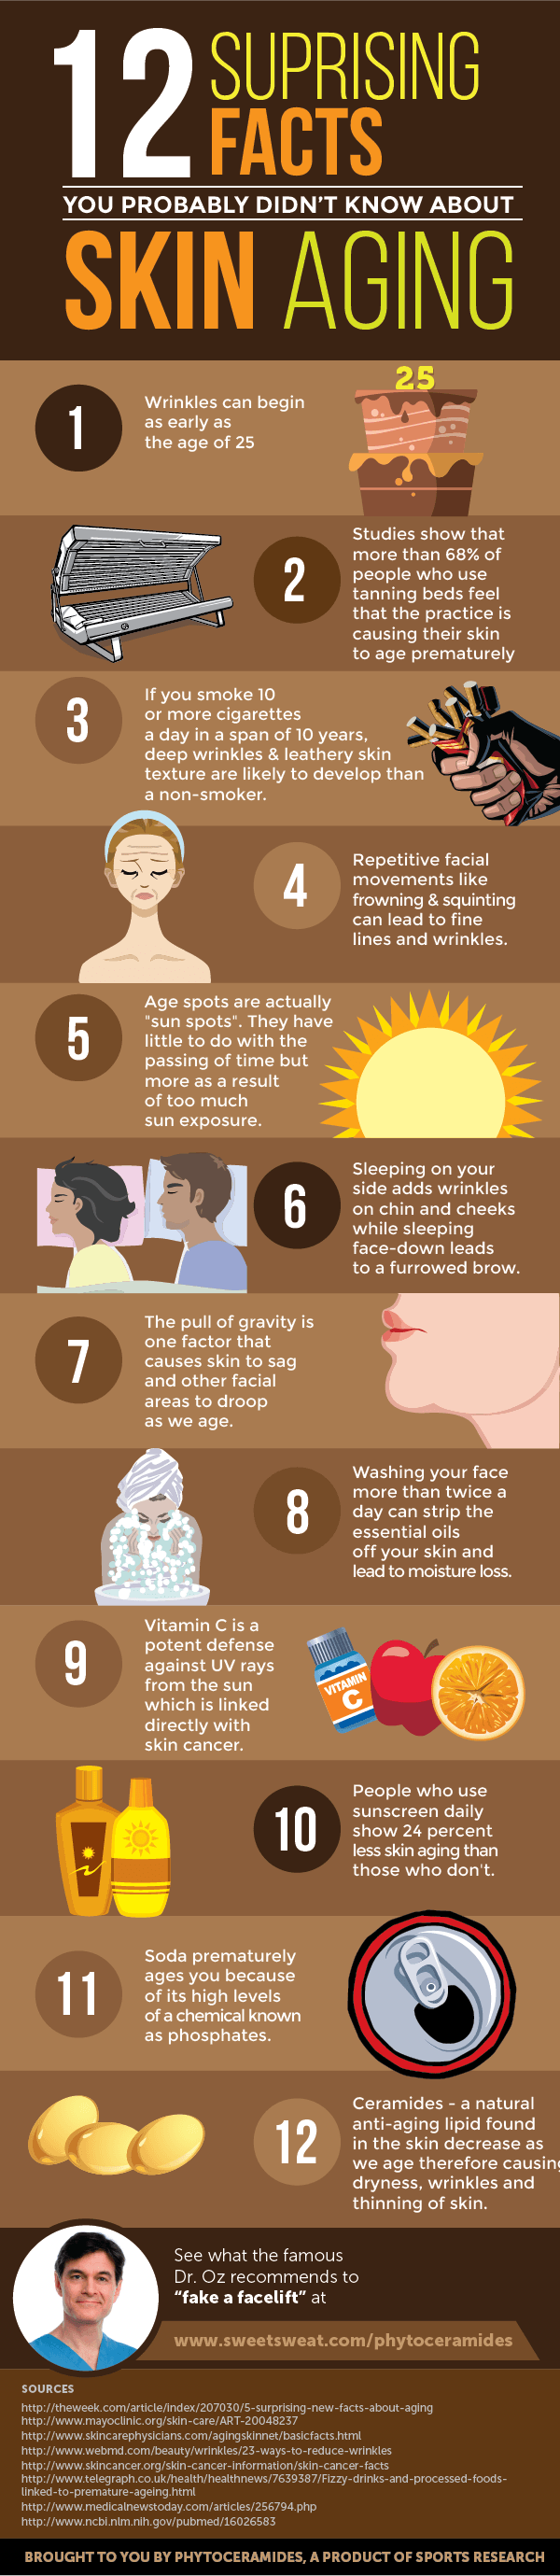 12 Surprising Facts You Probably Know About Skin Aging - LifeHack